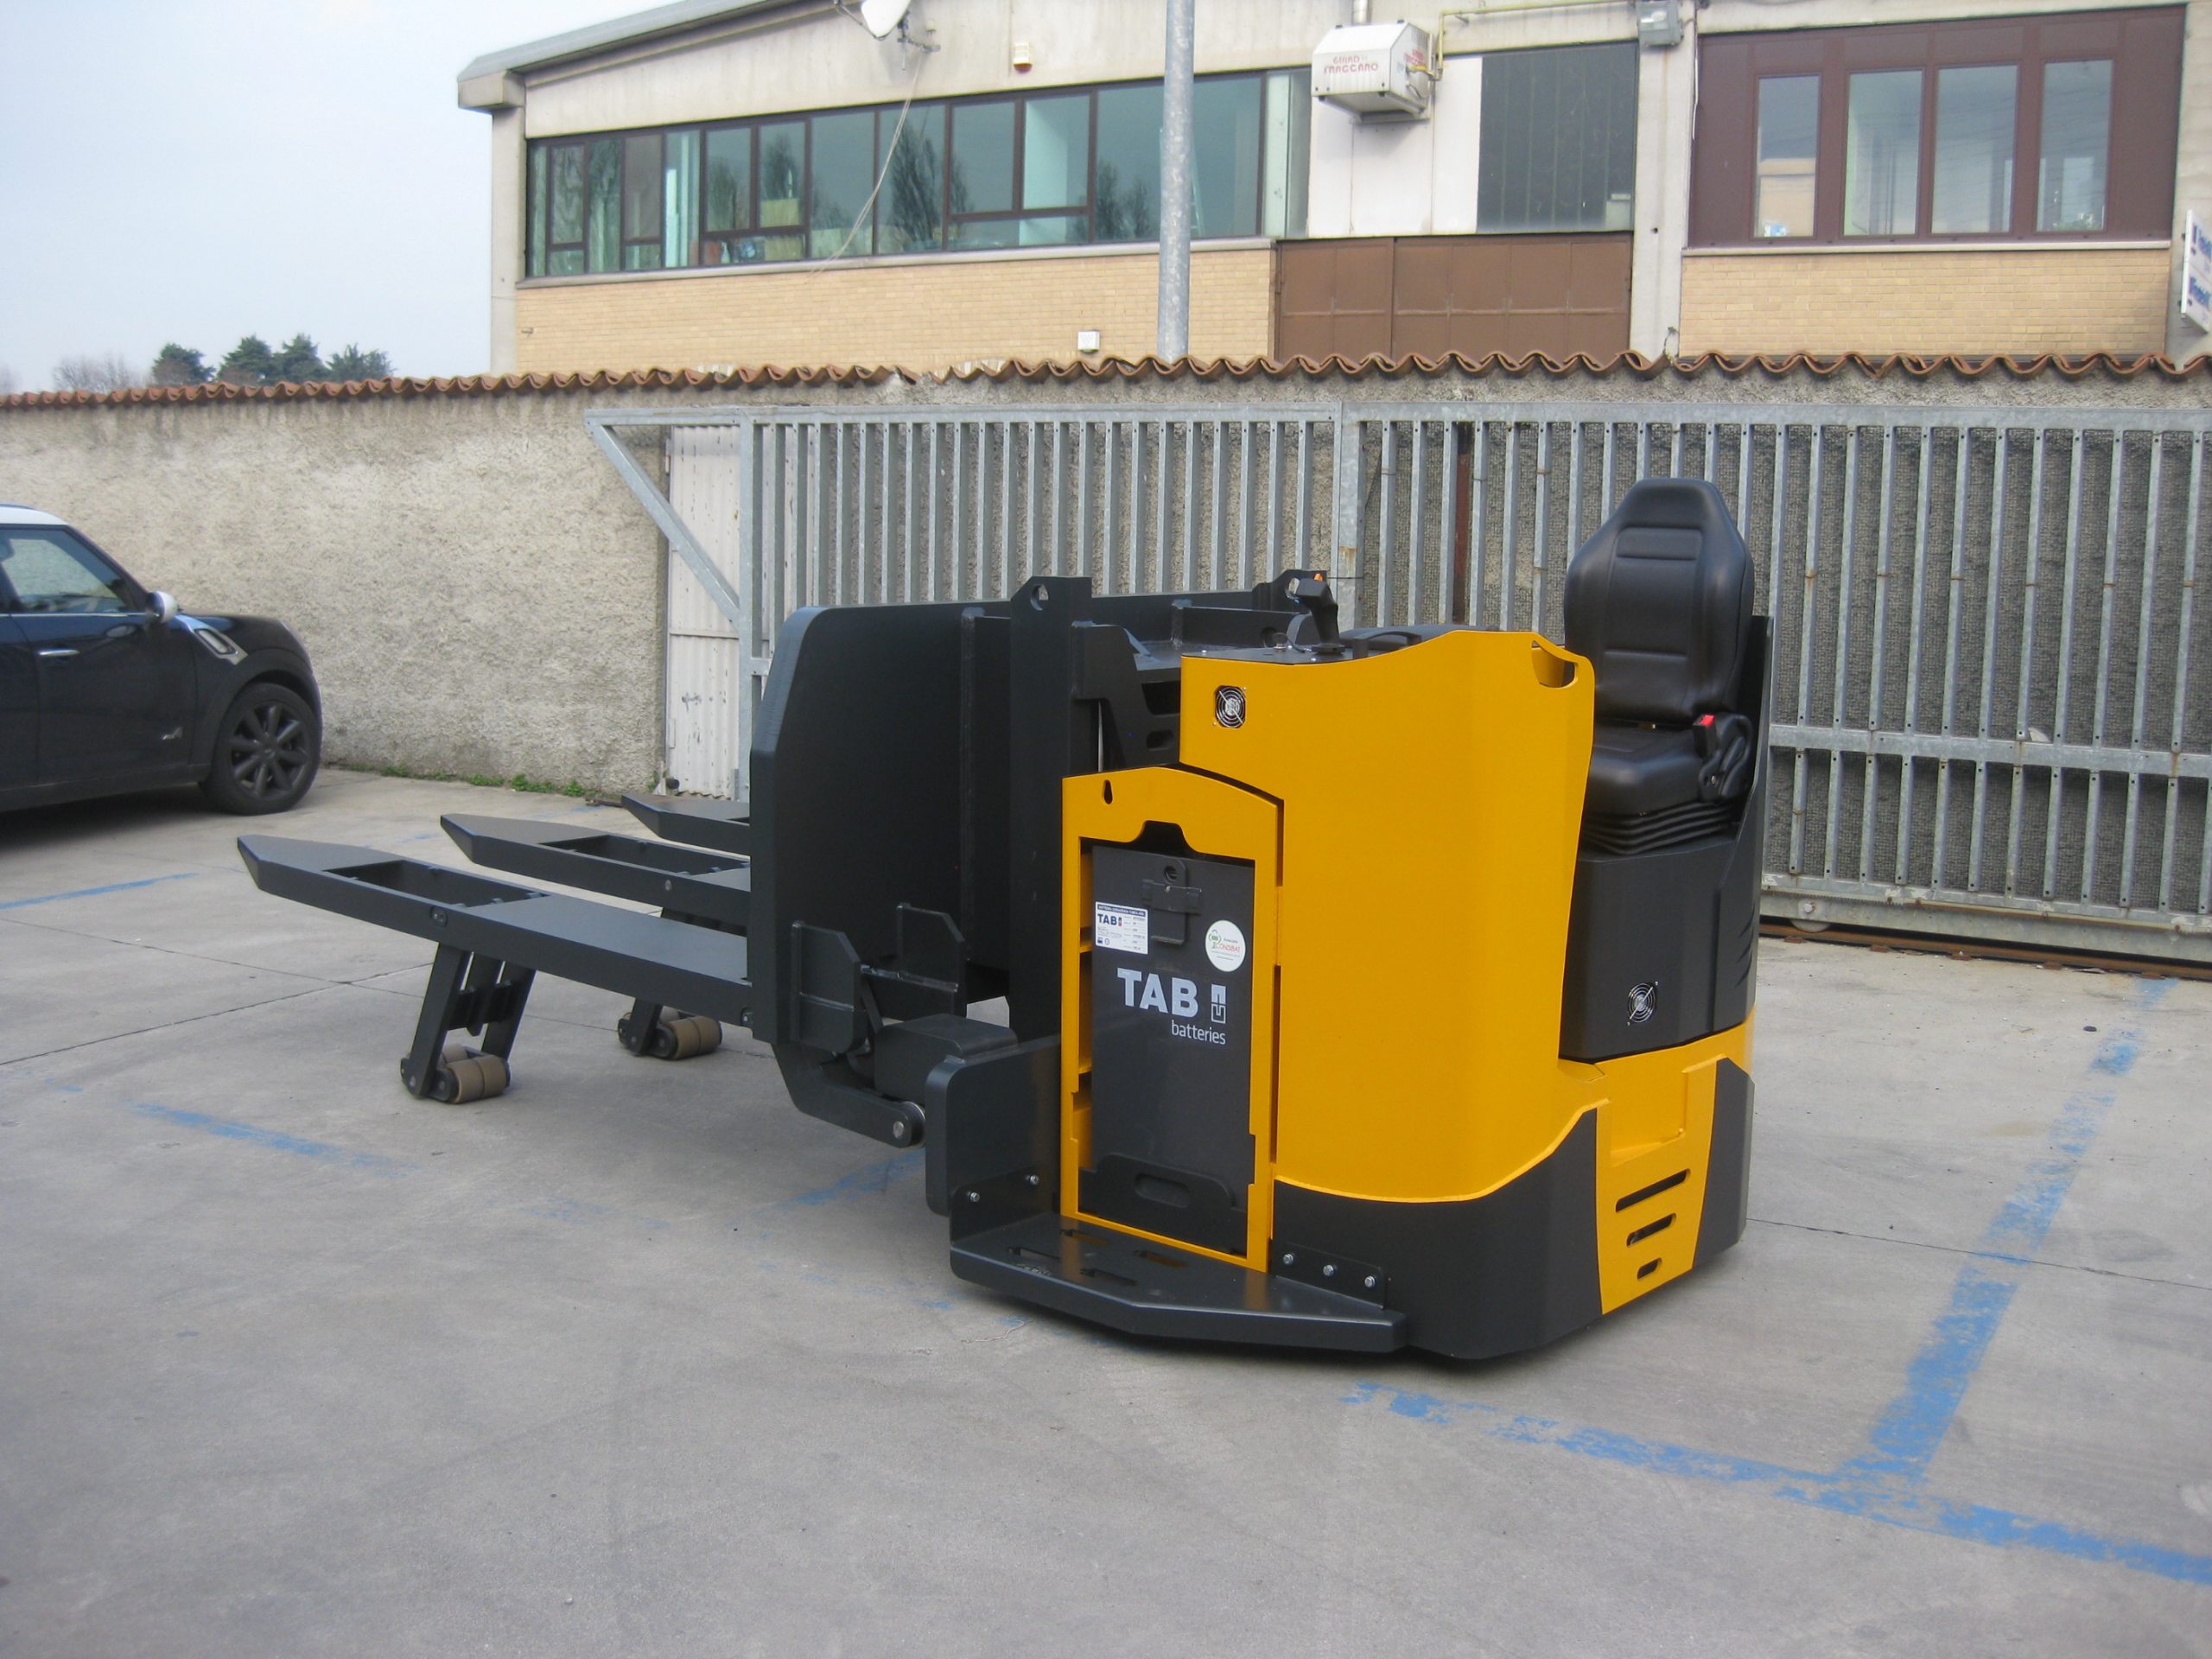 K9 SOB XT HD 80, 8000kg Aircraft slave pallet mover for use with cargo service / logistics.